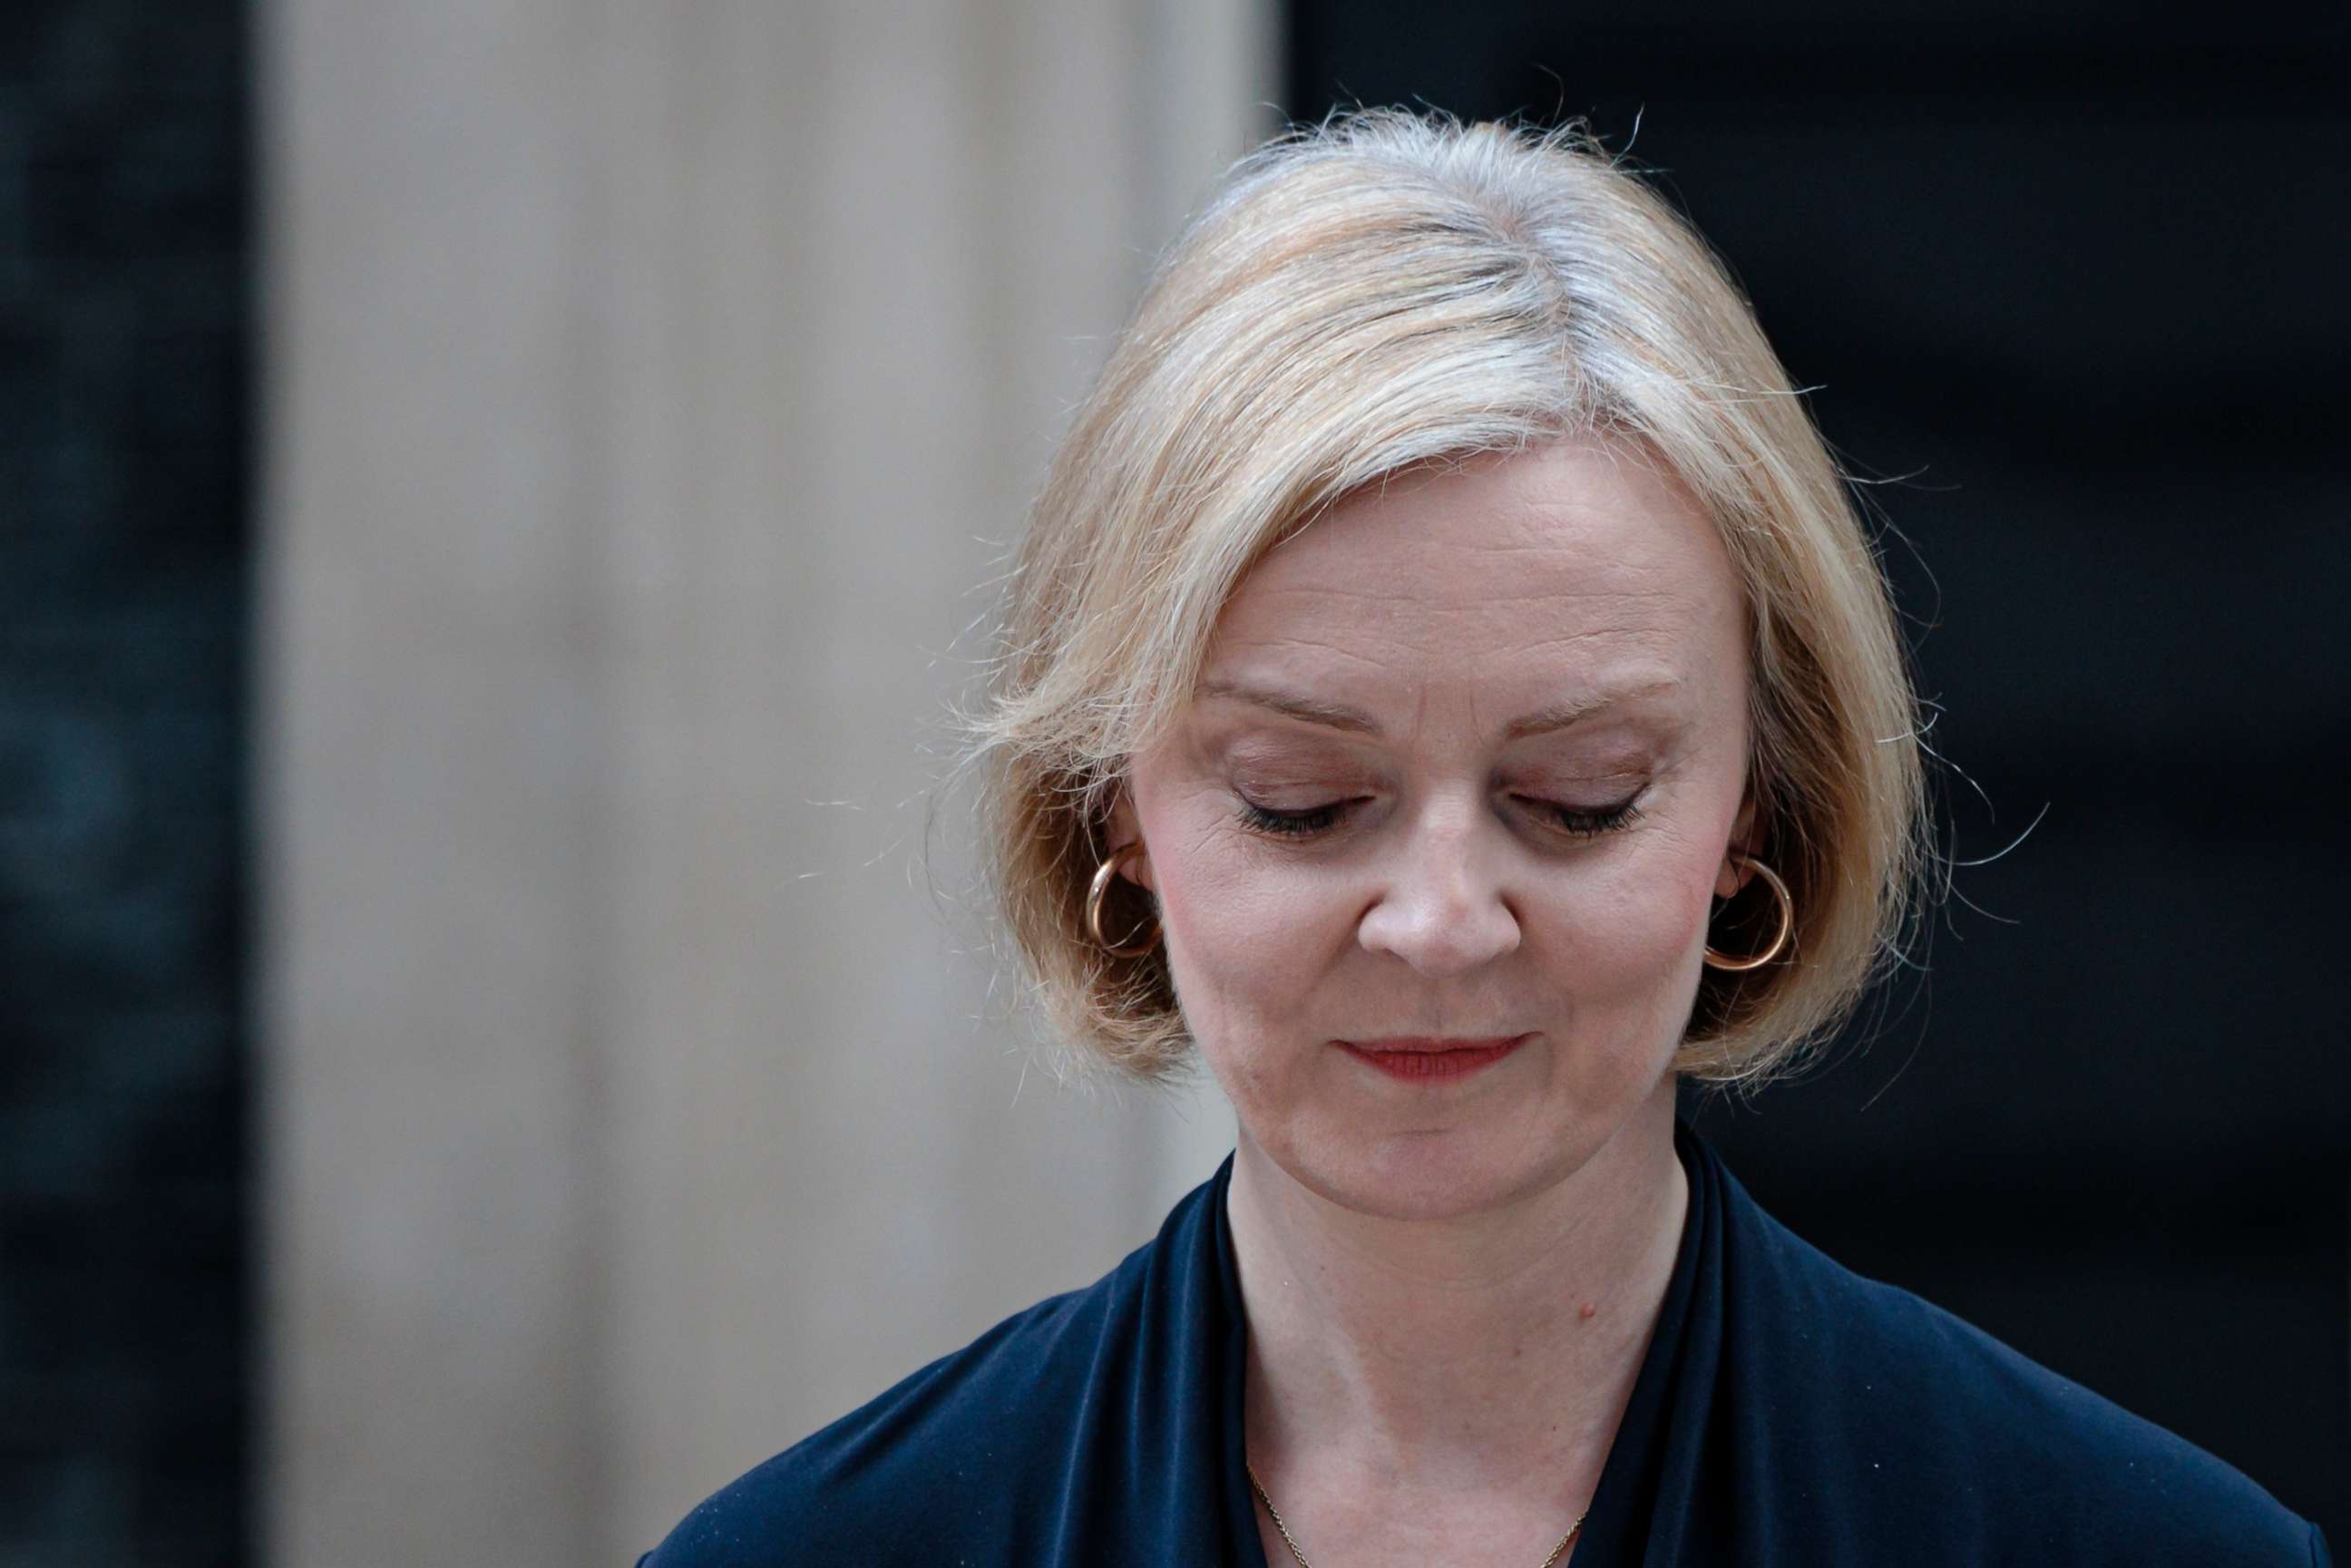 PHOTO: Prime Minister Liz Truss delivers her resignation speech at Downing Street on Oct. 20, 2022, in London.